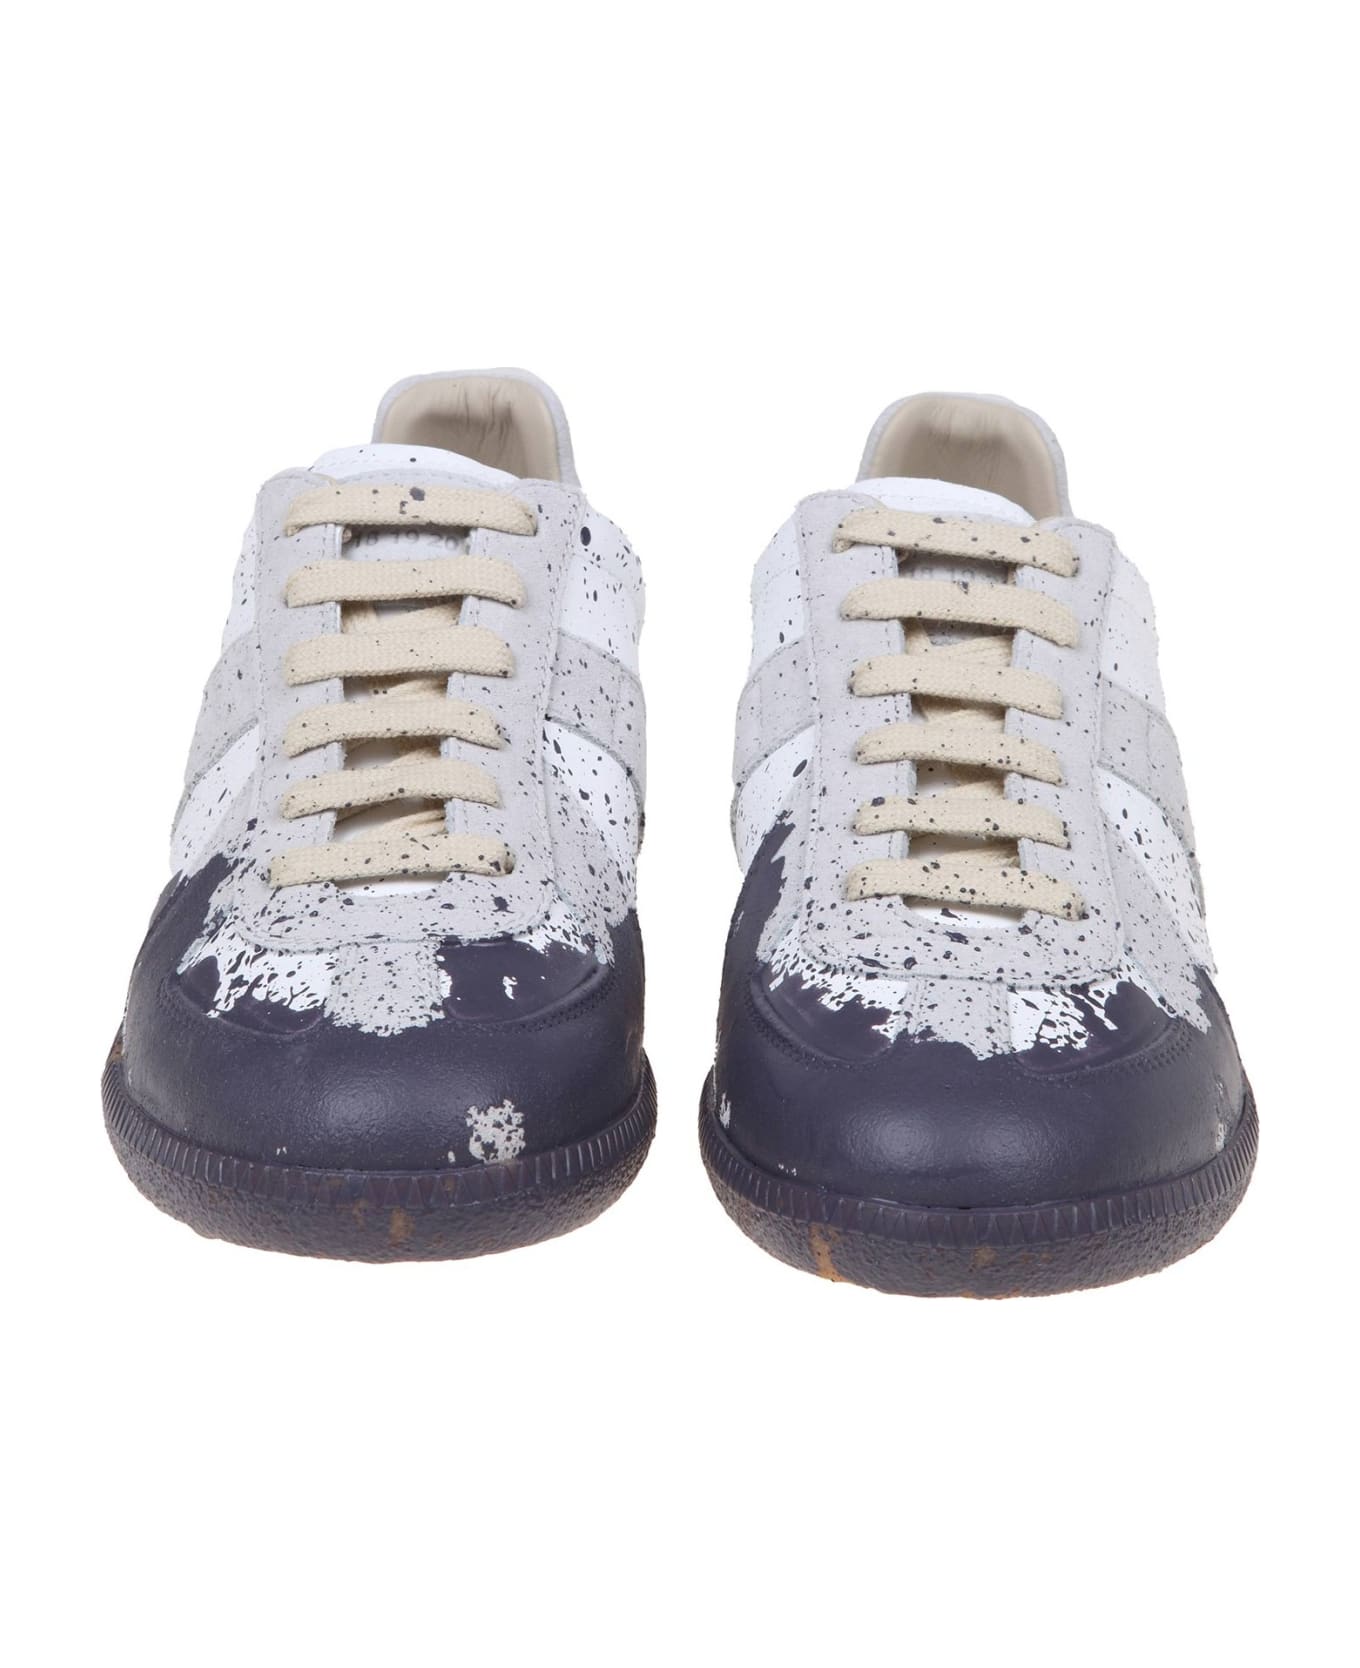 Maison Margiela Leather Sneakers With Paint Detail - White/Grey